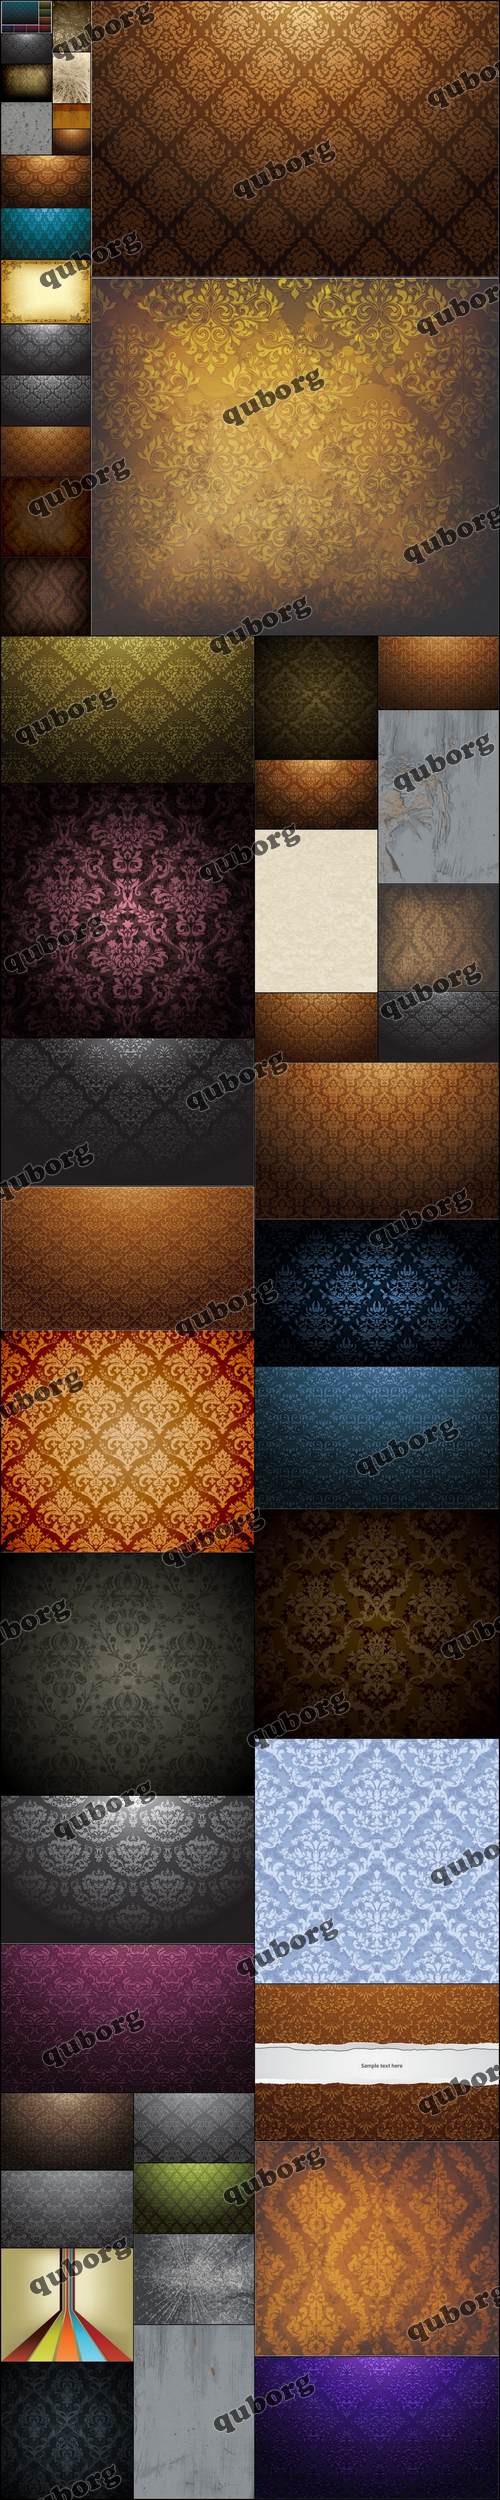 Stock Vector - 50 Wall Backgrounds Illustrations Set